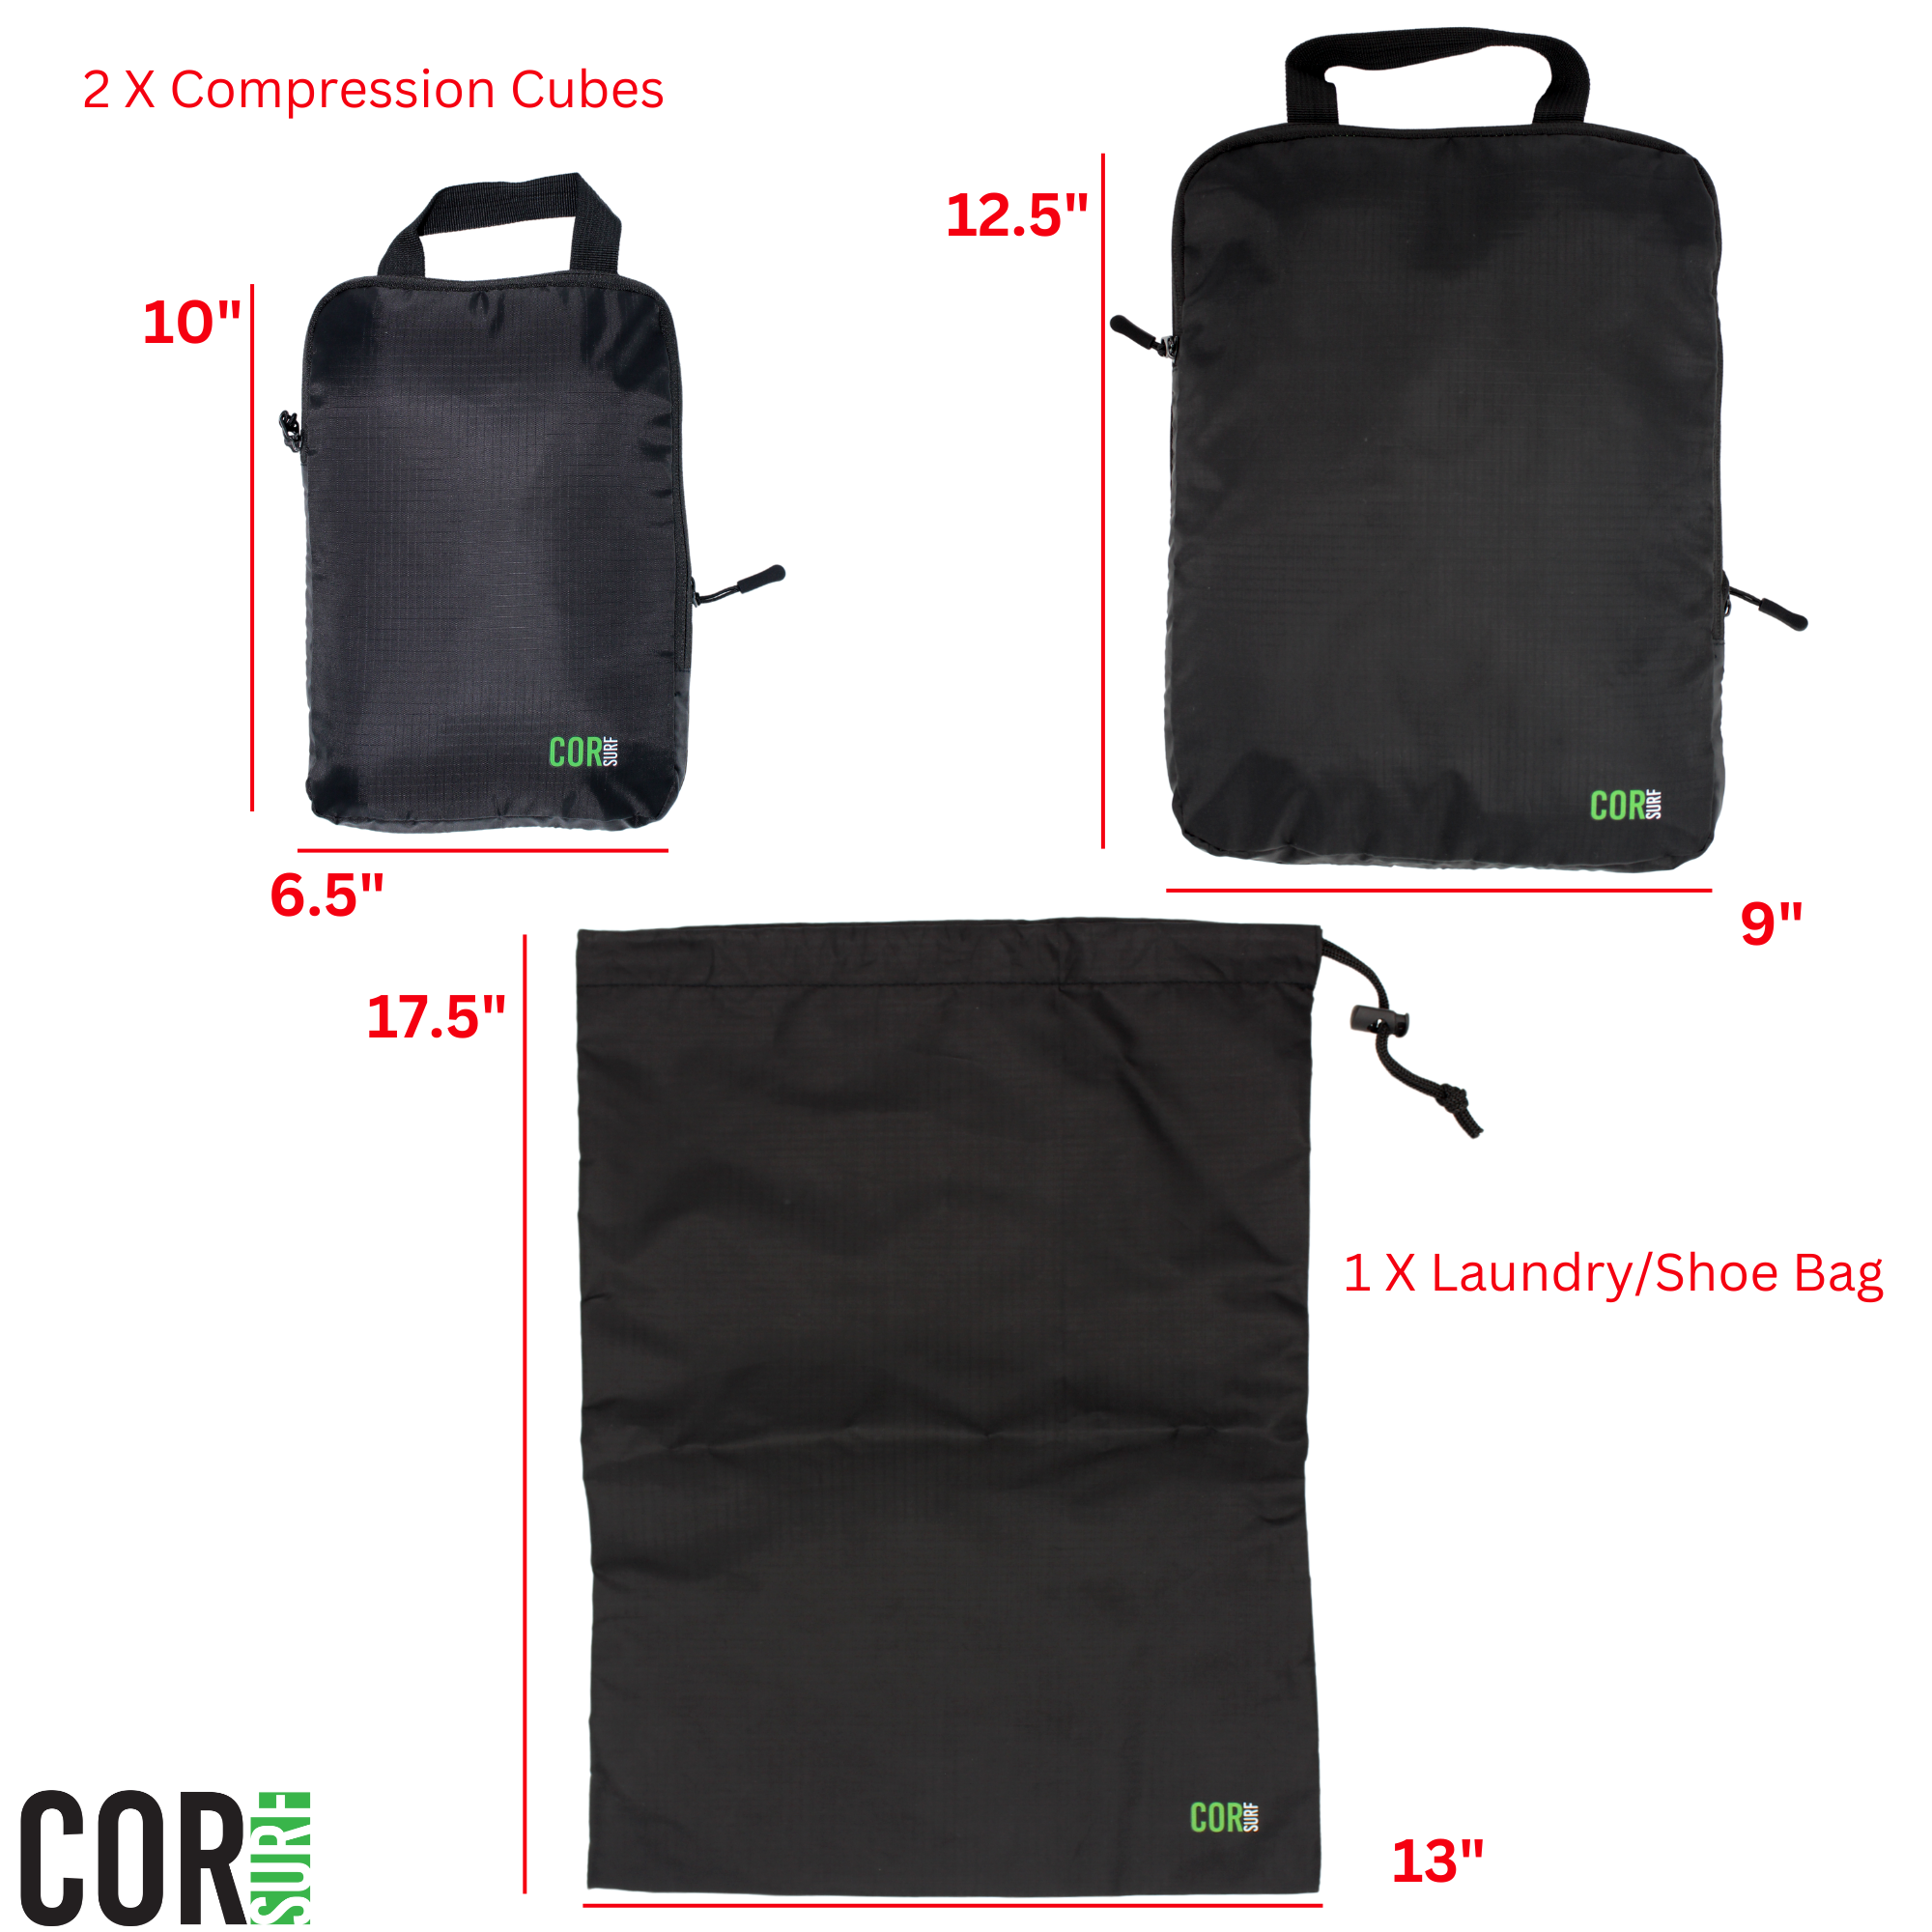 dimensions of compression packing cube organizers and laundry show bag